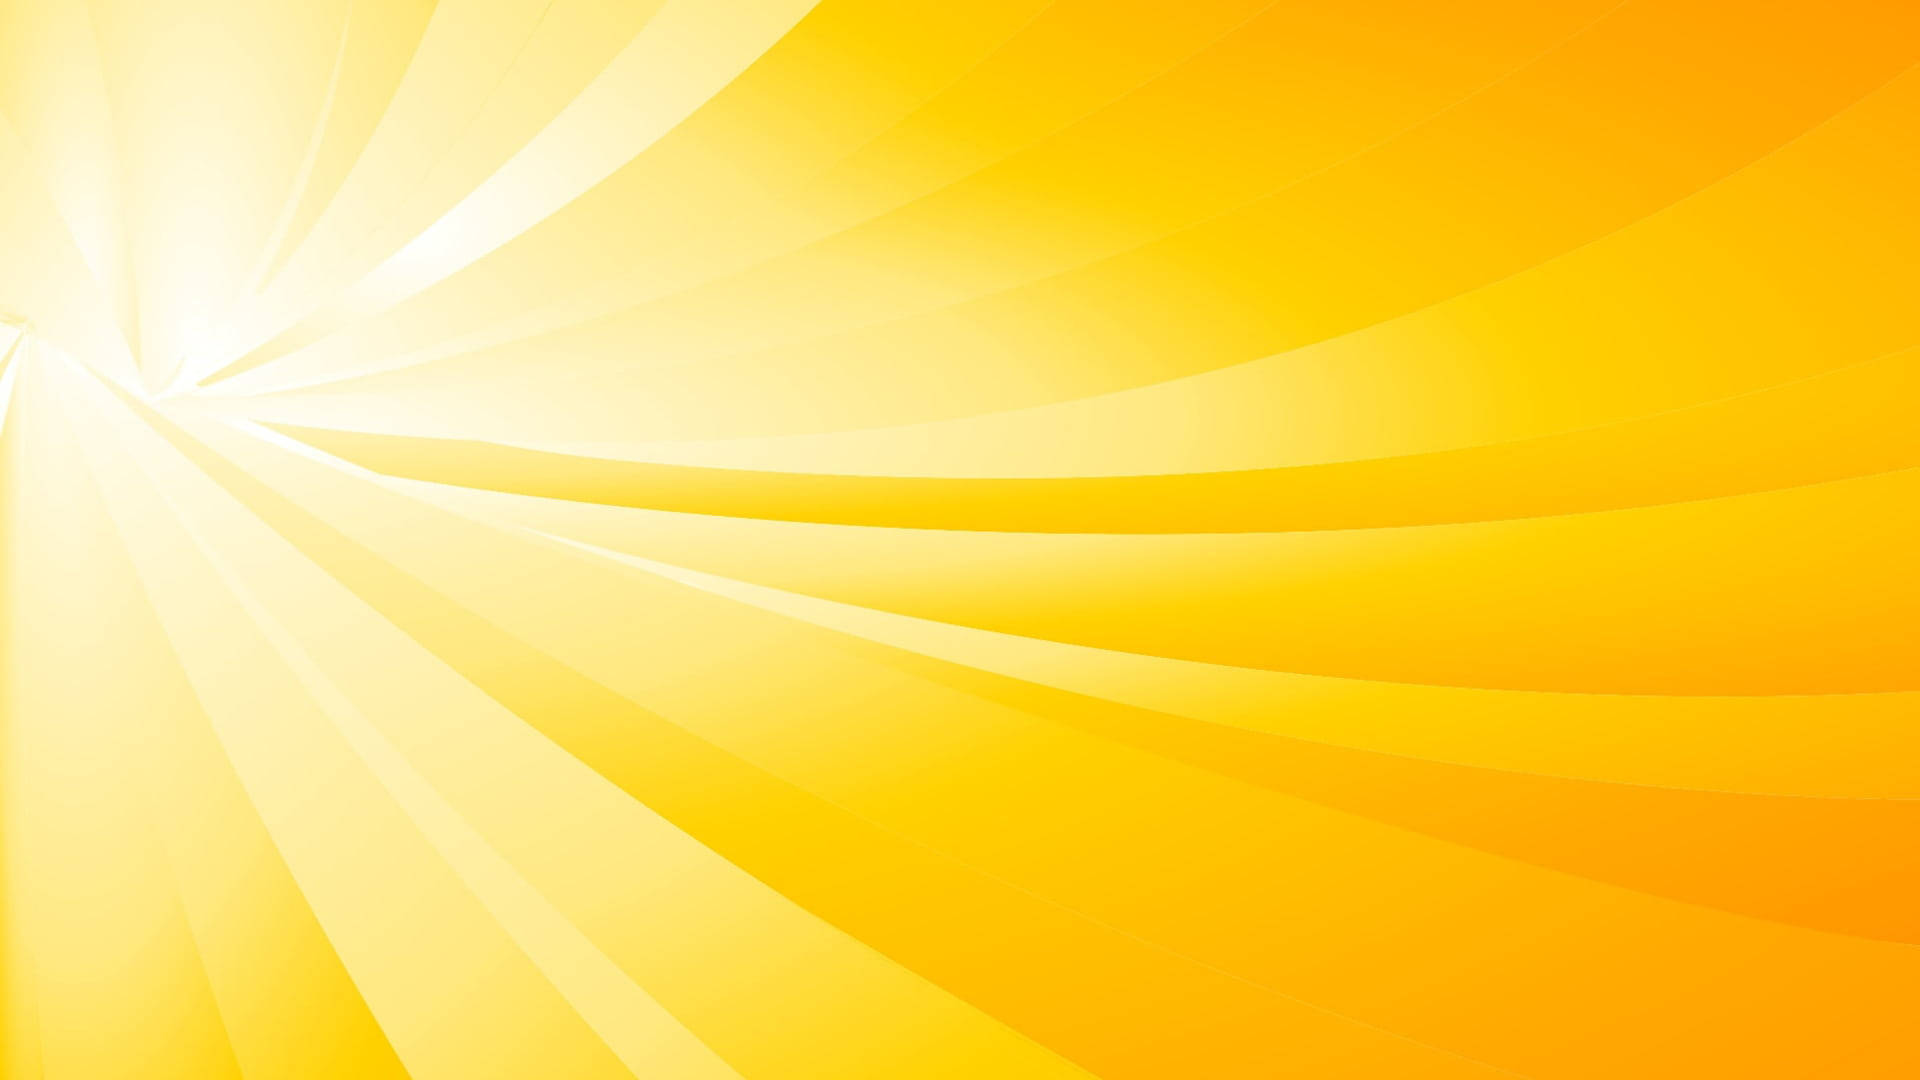 Orange And Yellow Hd Lines Background